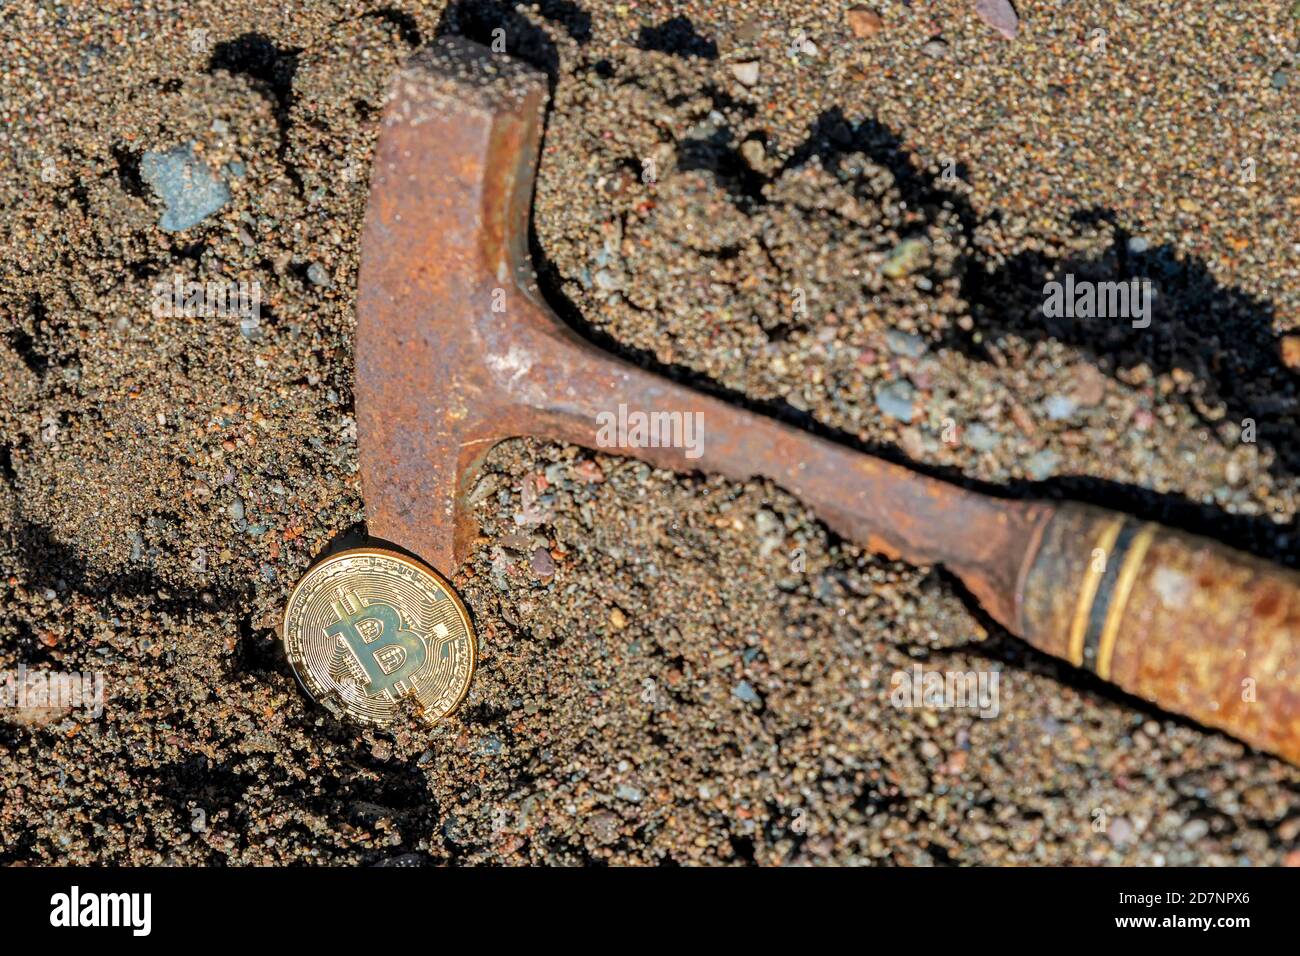 A pick axe digging a bitcoin out of sandy ground. The point of the pick axe is buried behind a single golden bitcoin. Stock Photo